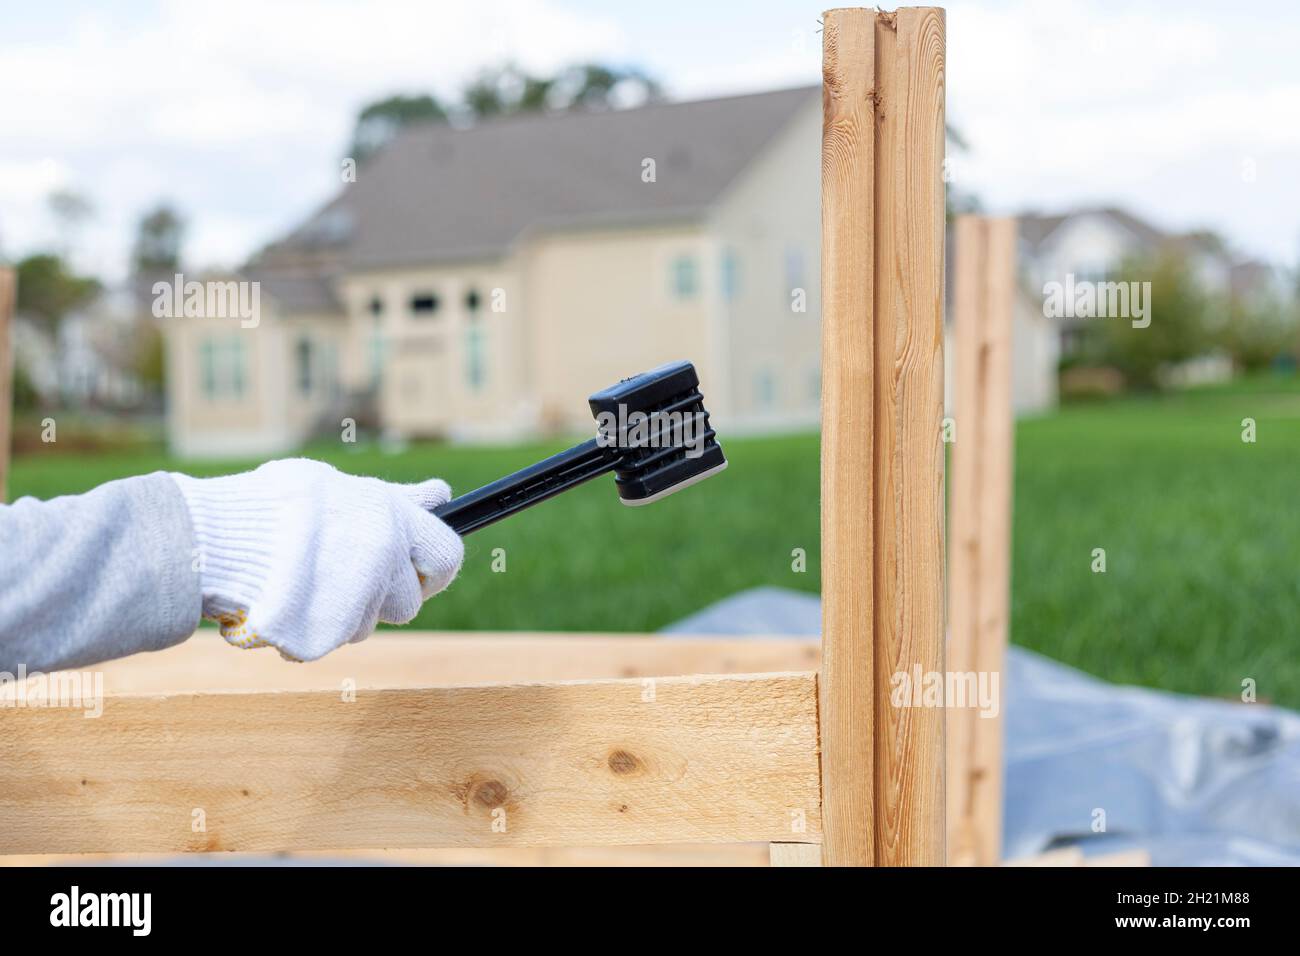 outdoor diy project in backyard with lawn. A person wearing safety gloves is installing a wooden fence or furniture using a plastic hammer to tighten. Stock Photo